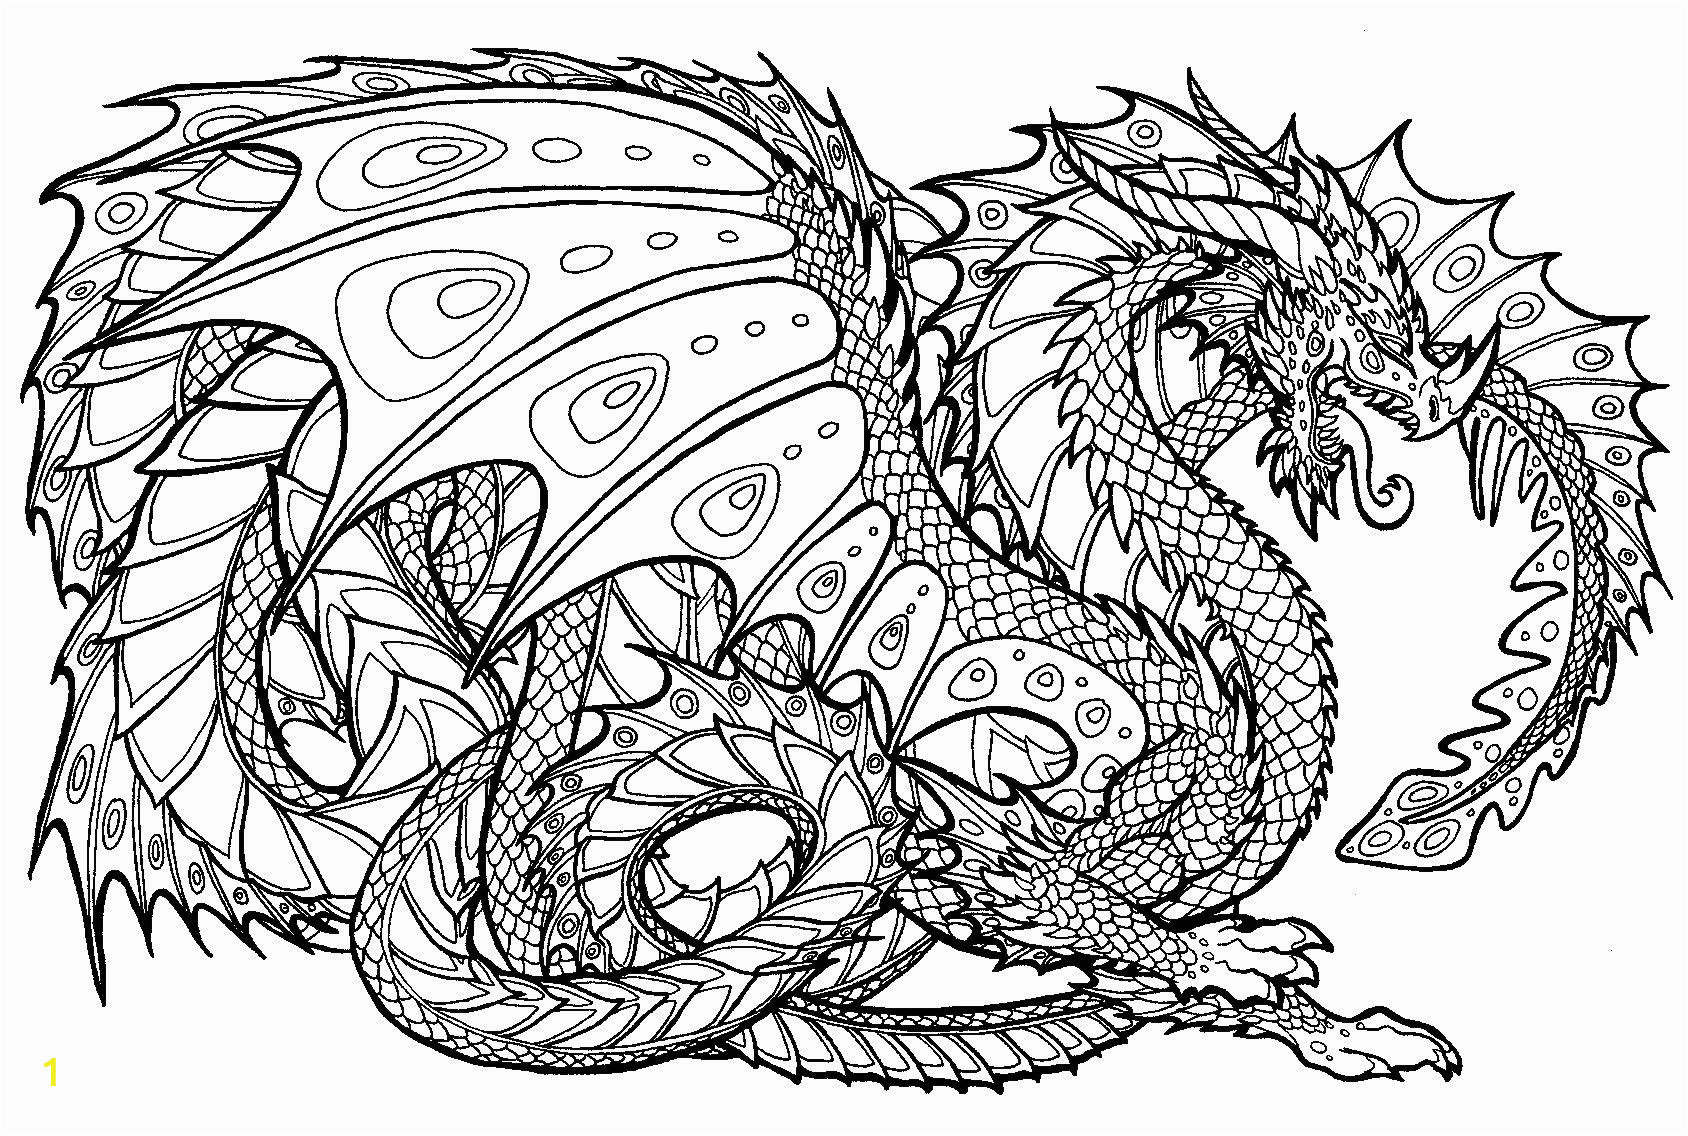 Dragon City Coloring Pages Dragon Coloring Pages for Adults Best Coloring Pages for Kids